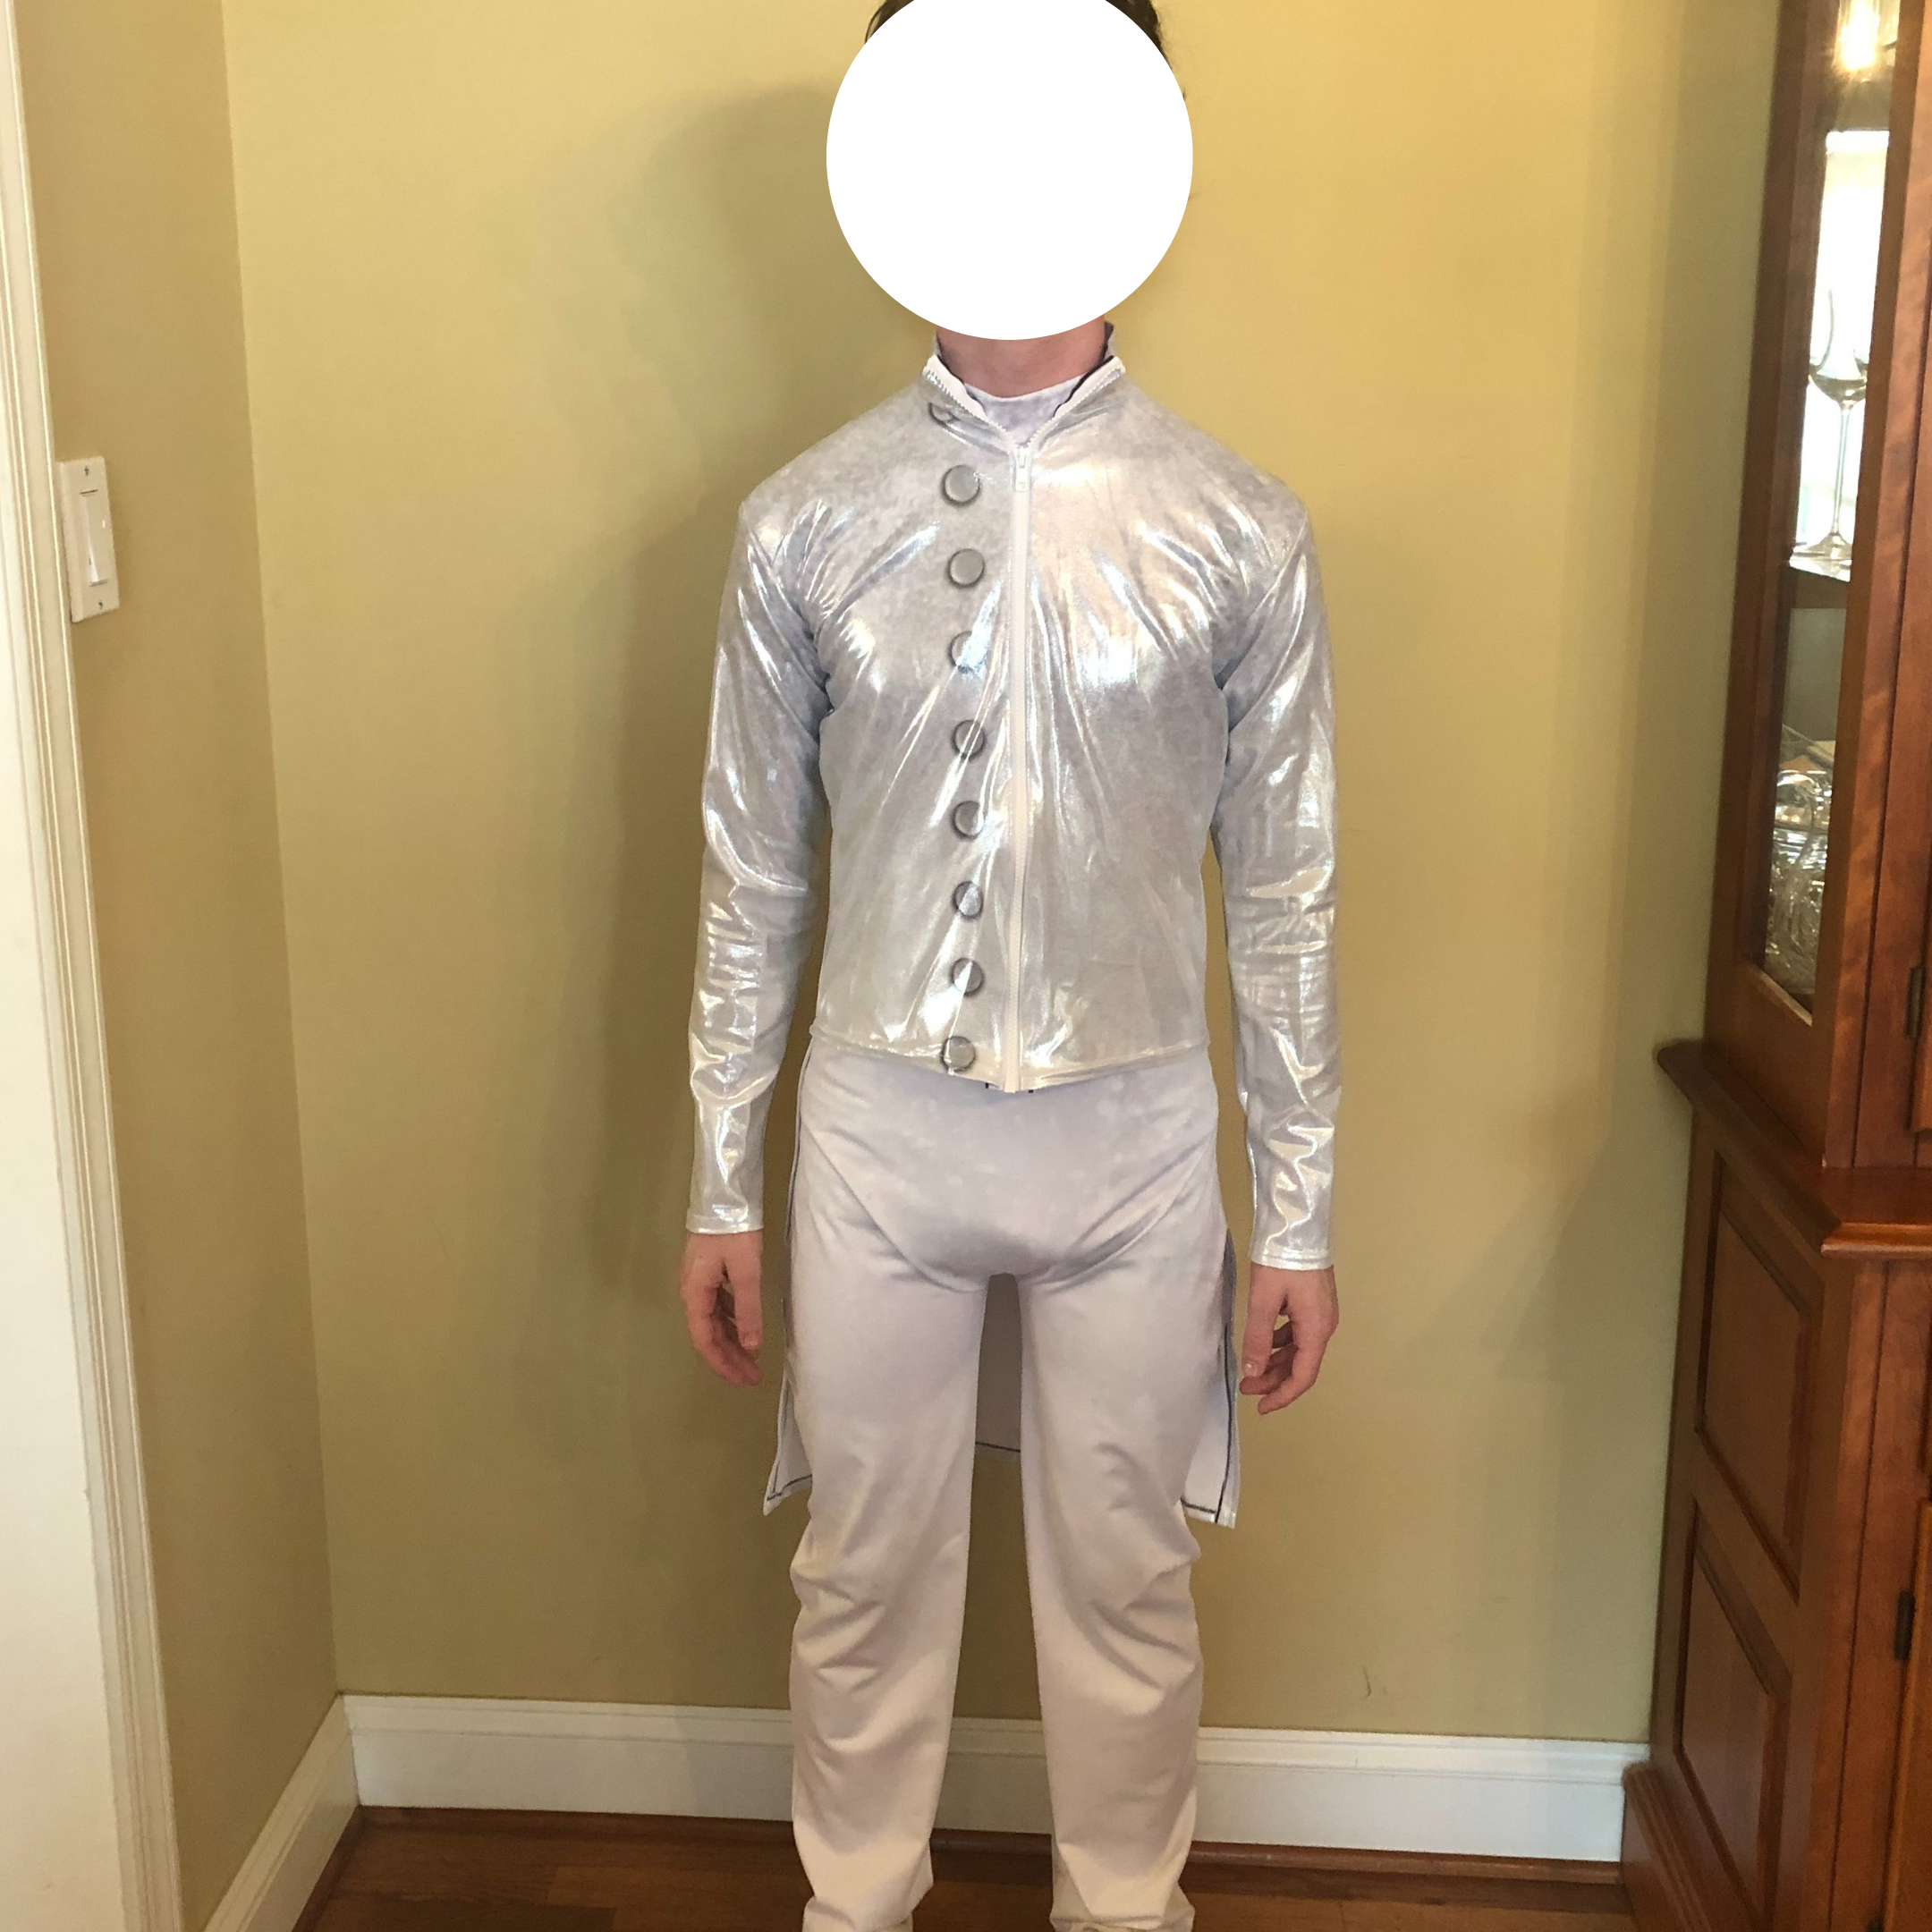 Synced Up Designs Custom White/Silver Unitards with Glitterfoil Jackets and Armbands